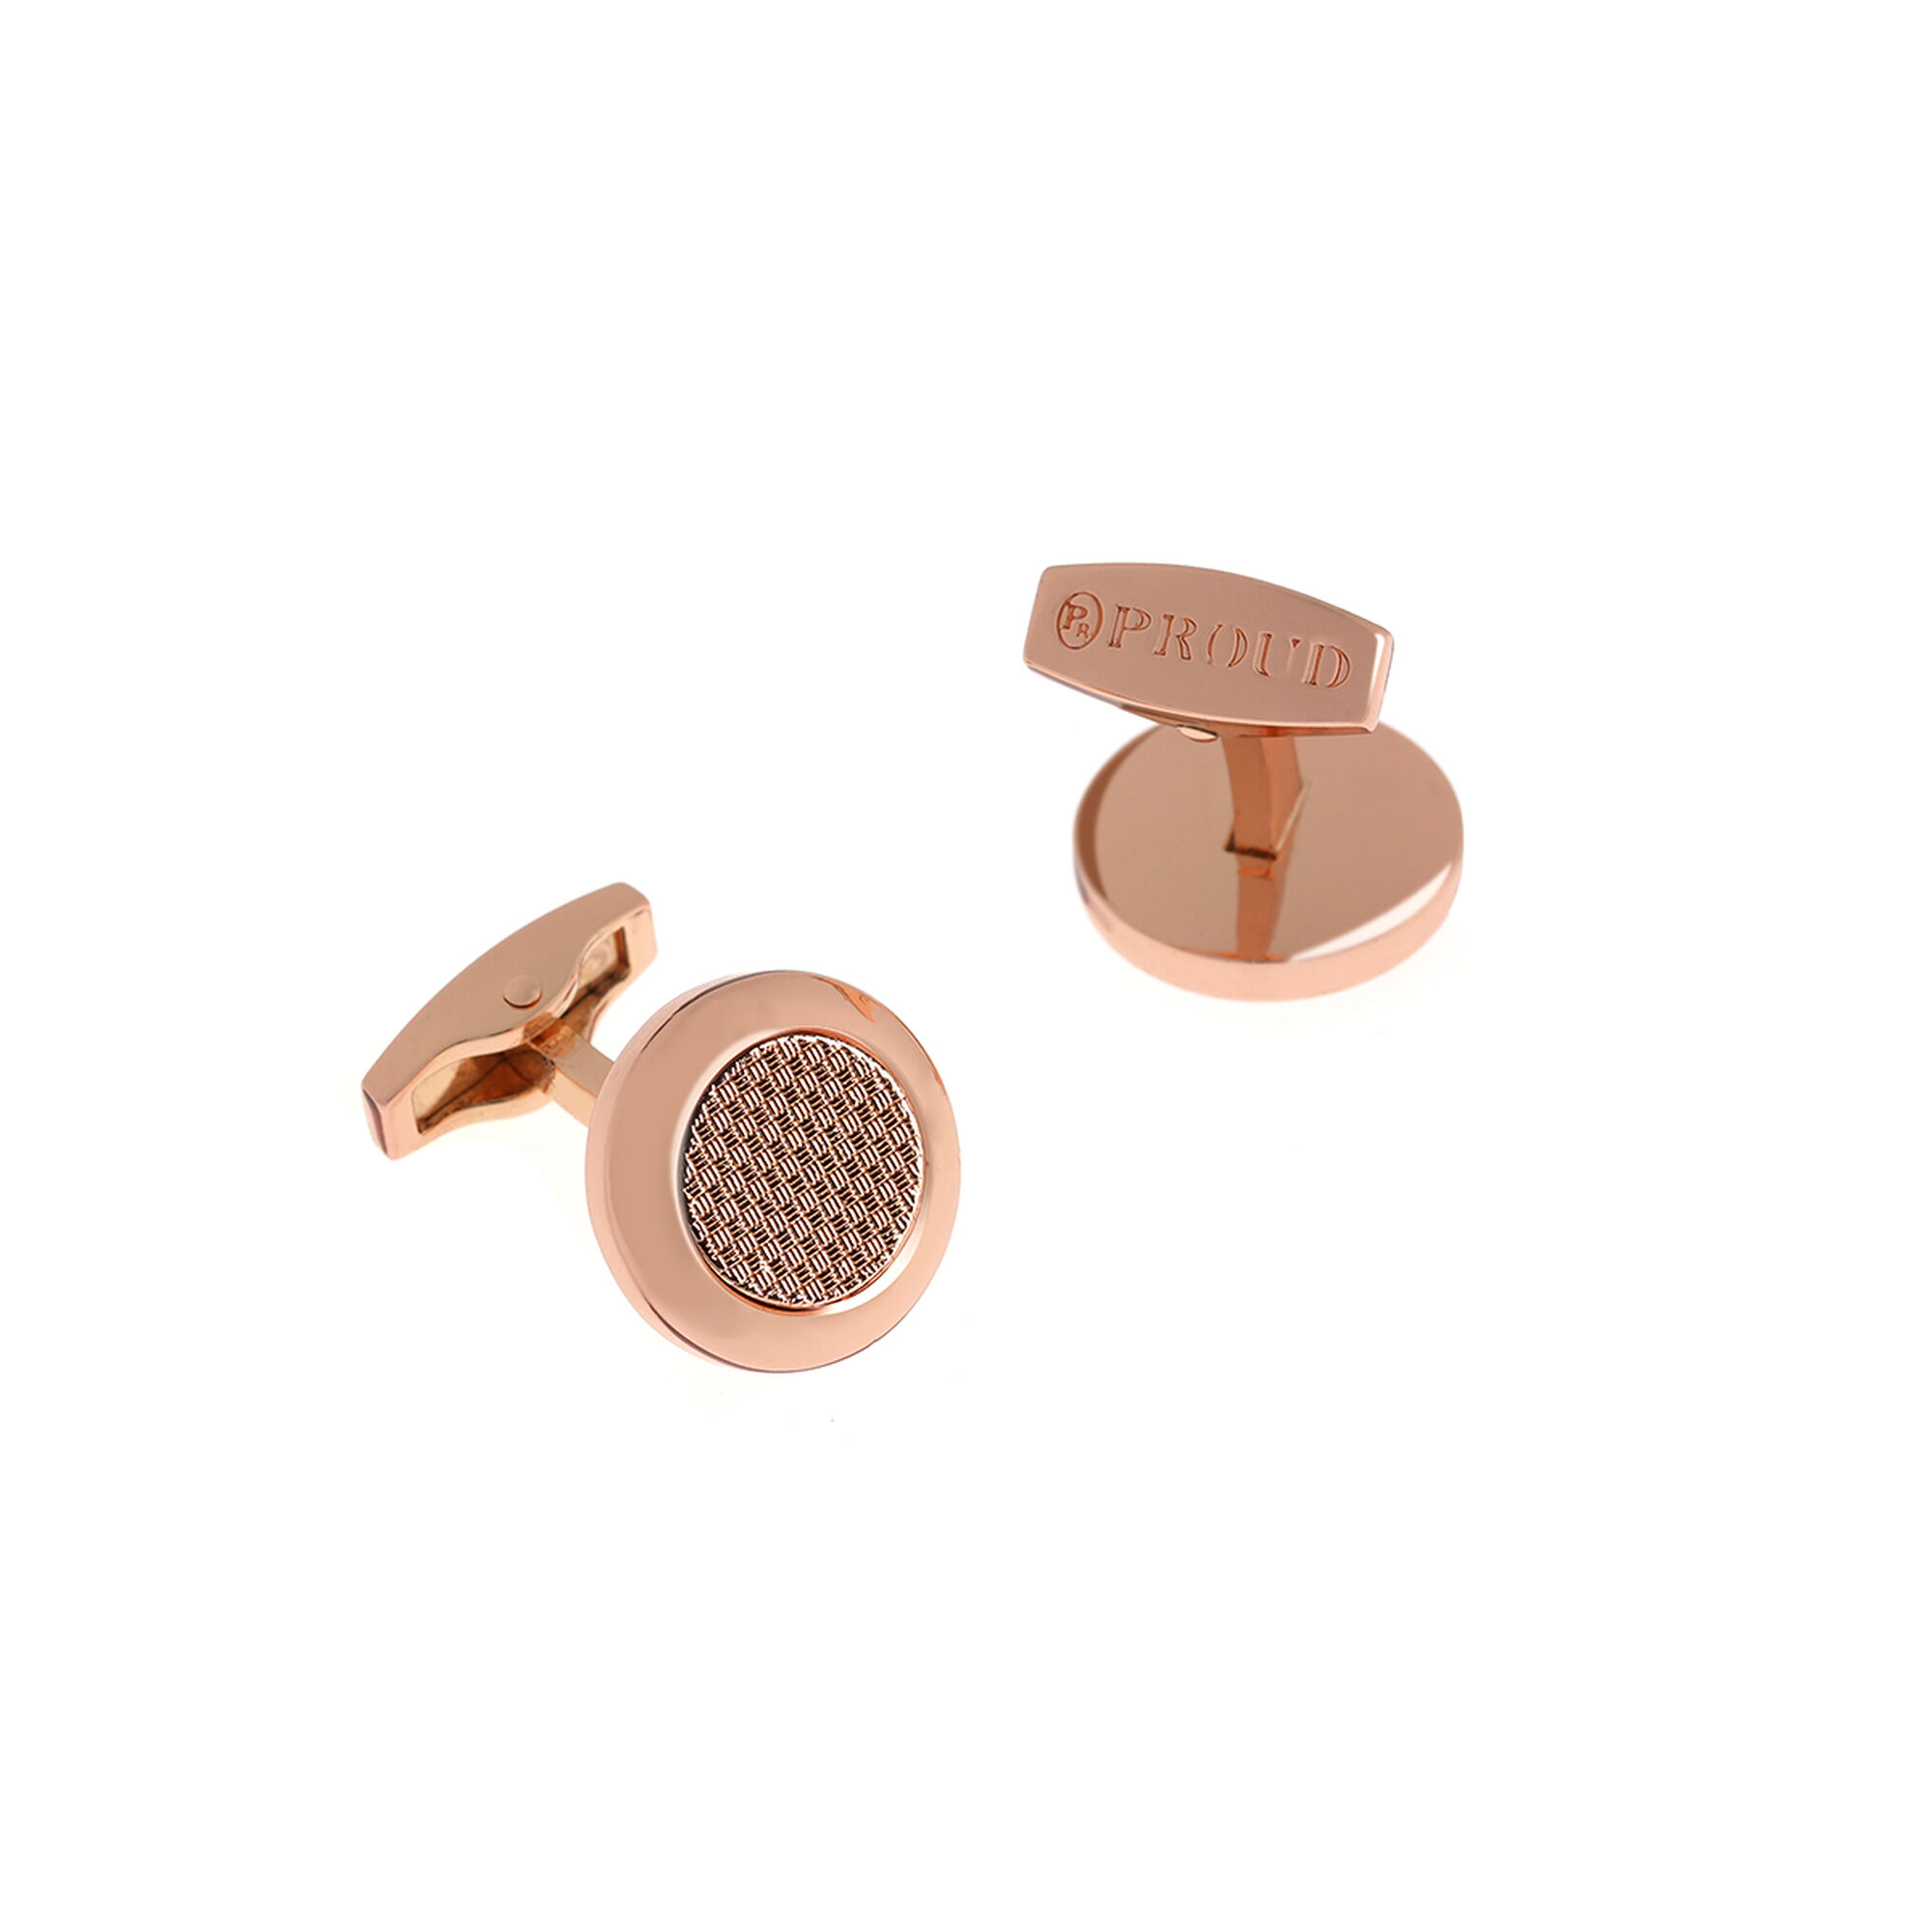 Proud accessories giftset rosegold 6 pcs.